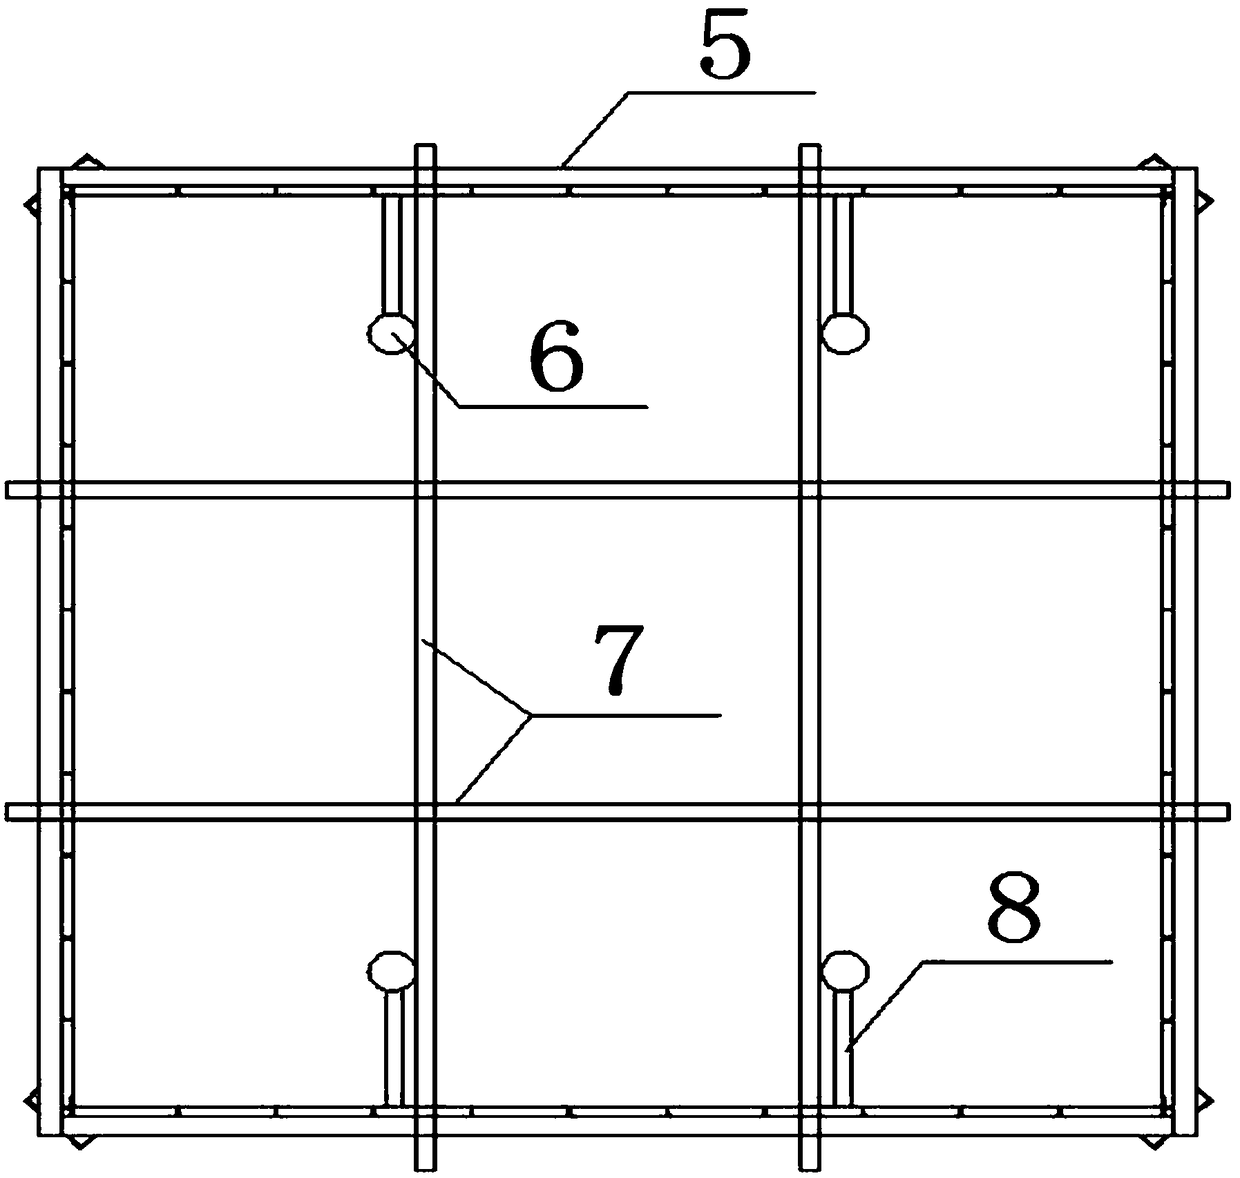 A bottomless steel casing cast-in-place concrete diversion cofferdam and its construction method